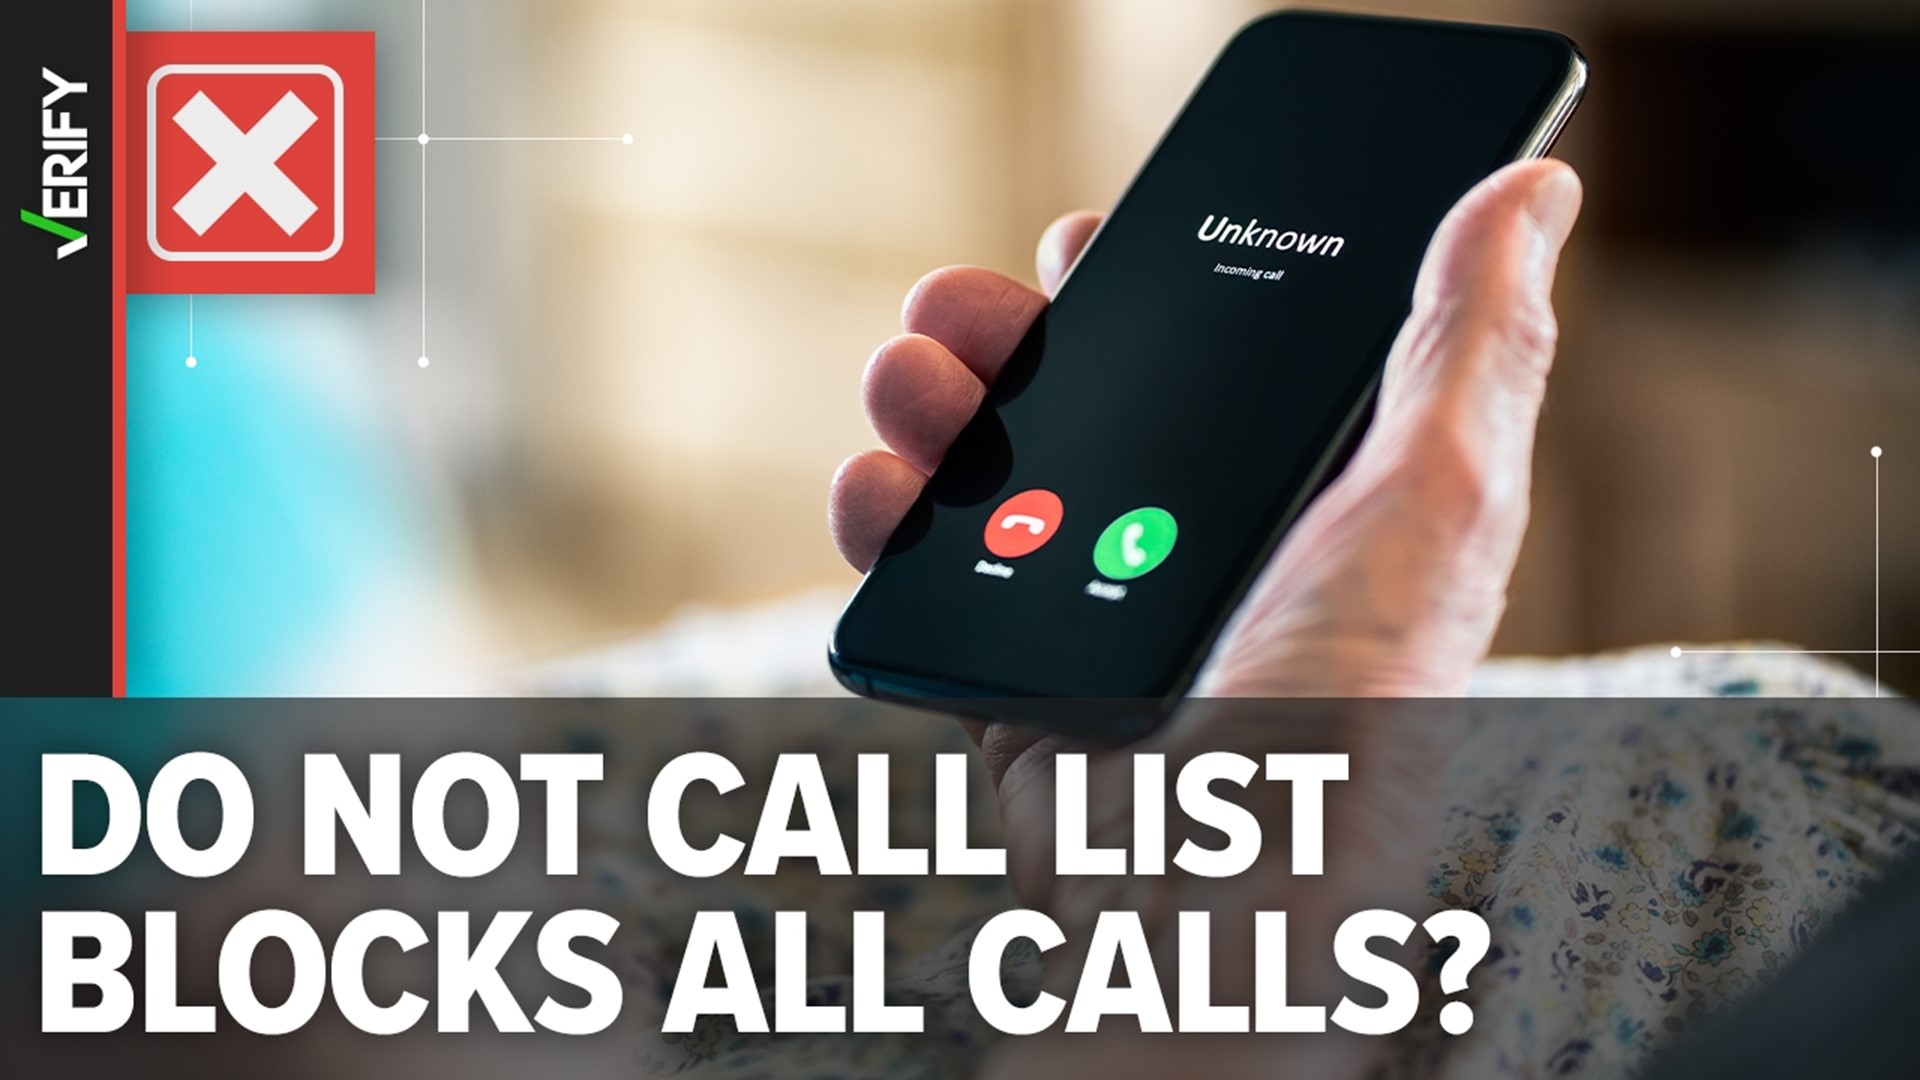 Unsolicited political or charity calls, surveys are still allowed if the number is on Do Not Call Registry. The list only blocks sales calls and illegal robocalls.